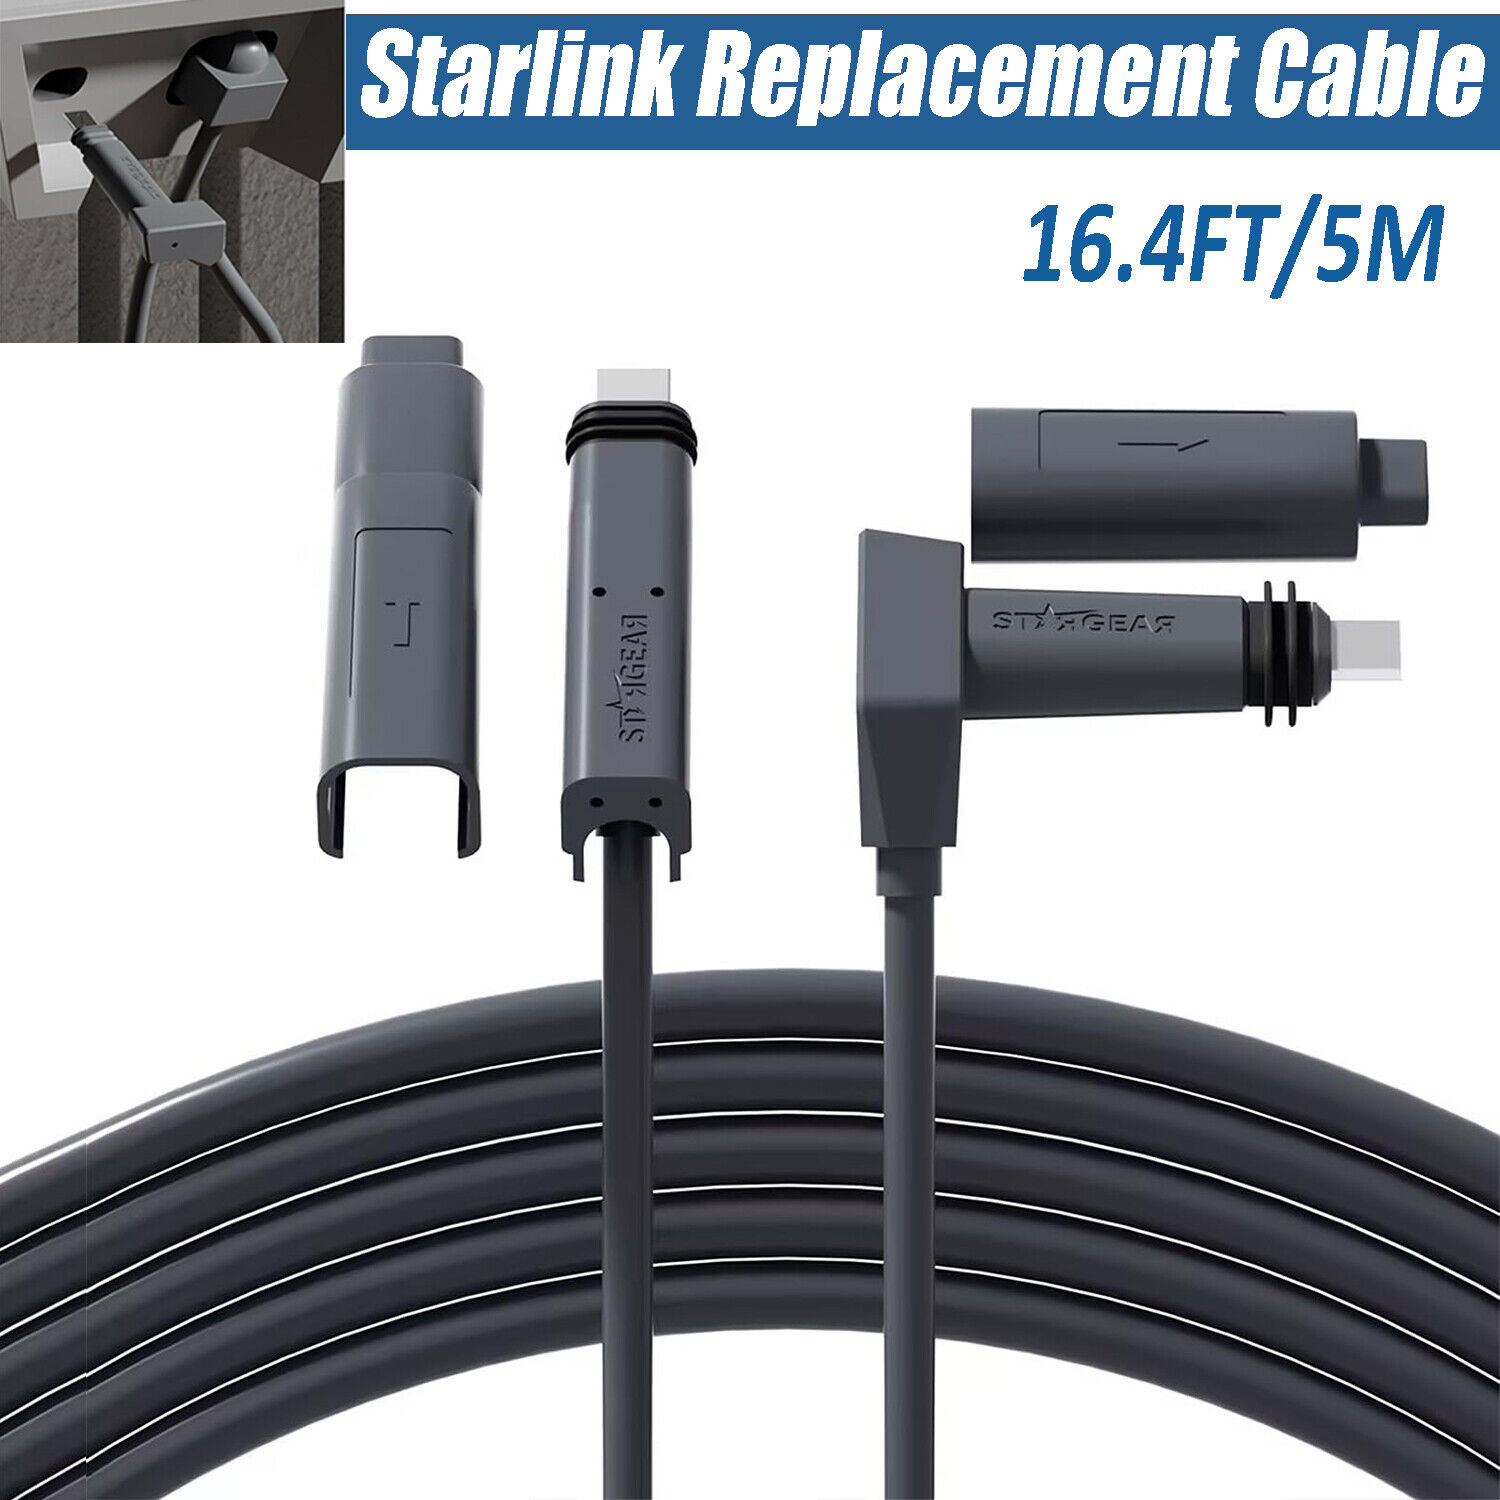 For Starlink Satellite Gen 2 16.4FT / 5 M Extension Replacement Cable Router Kit